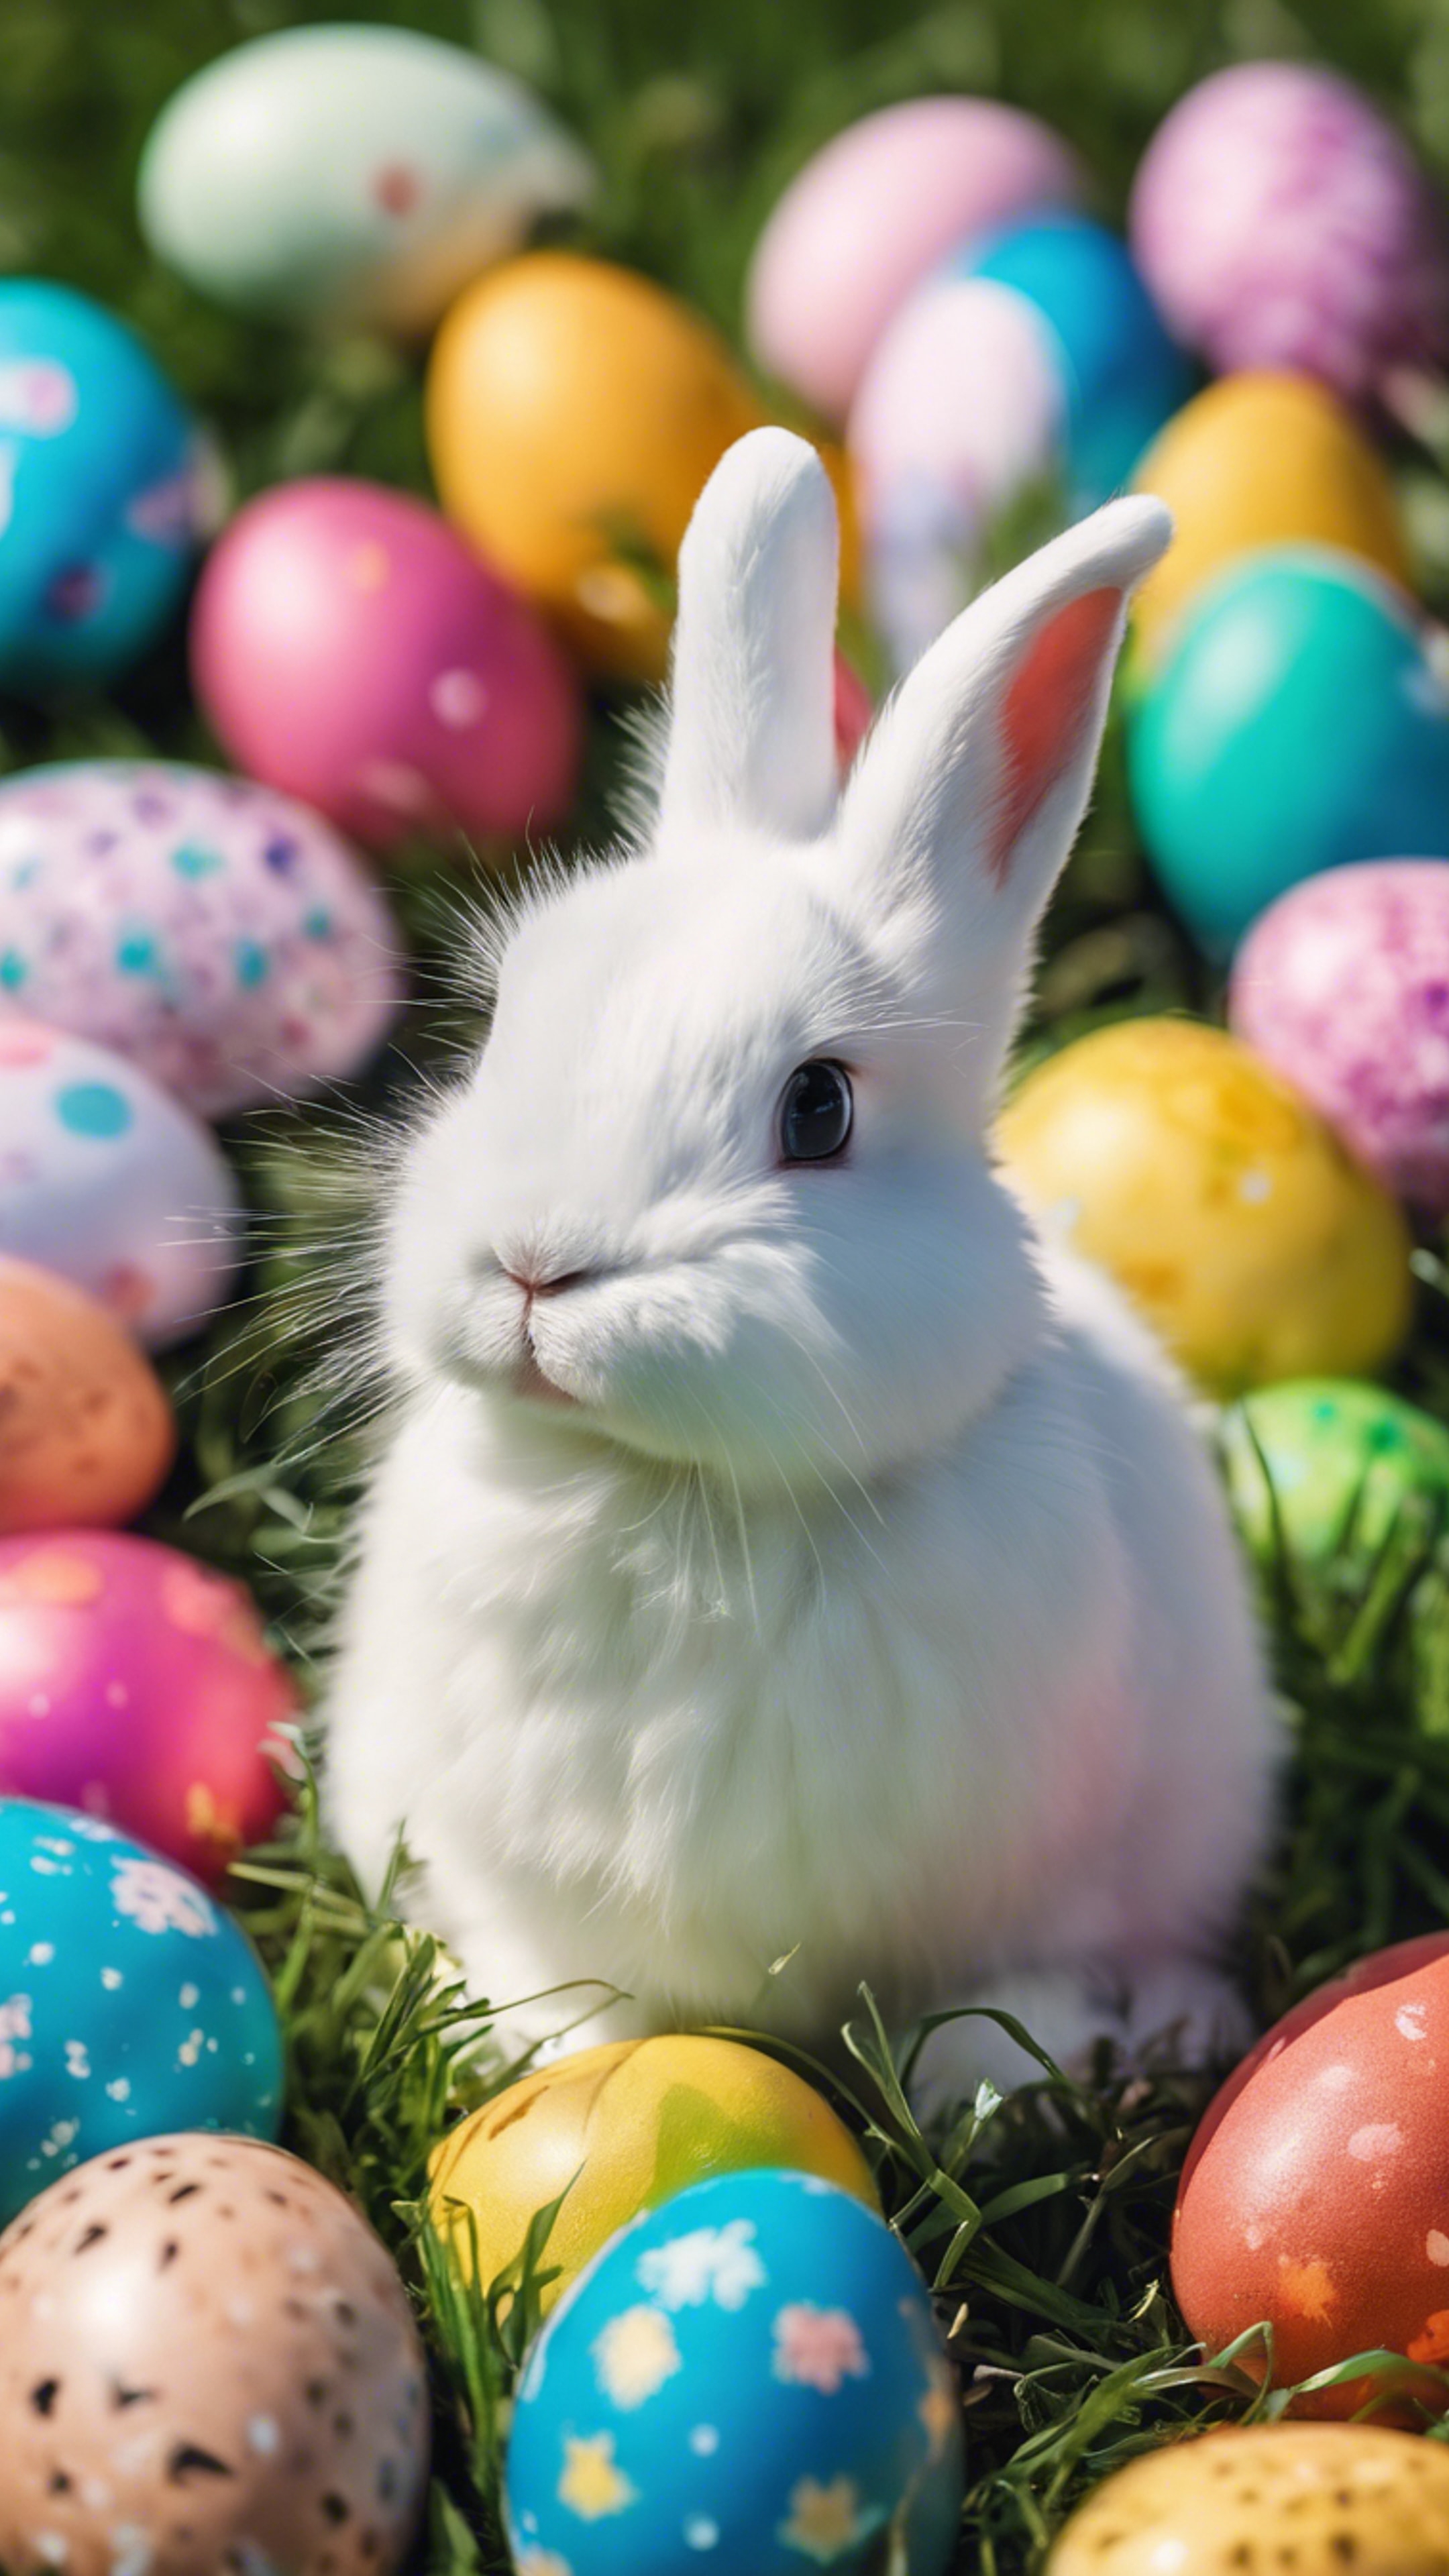 A group of fluffy rabbits surrounded by colorful Easter eggs in a sunny meadow.壁紙[da4f773d6ea74733b4fe]